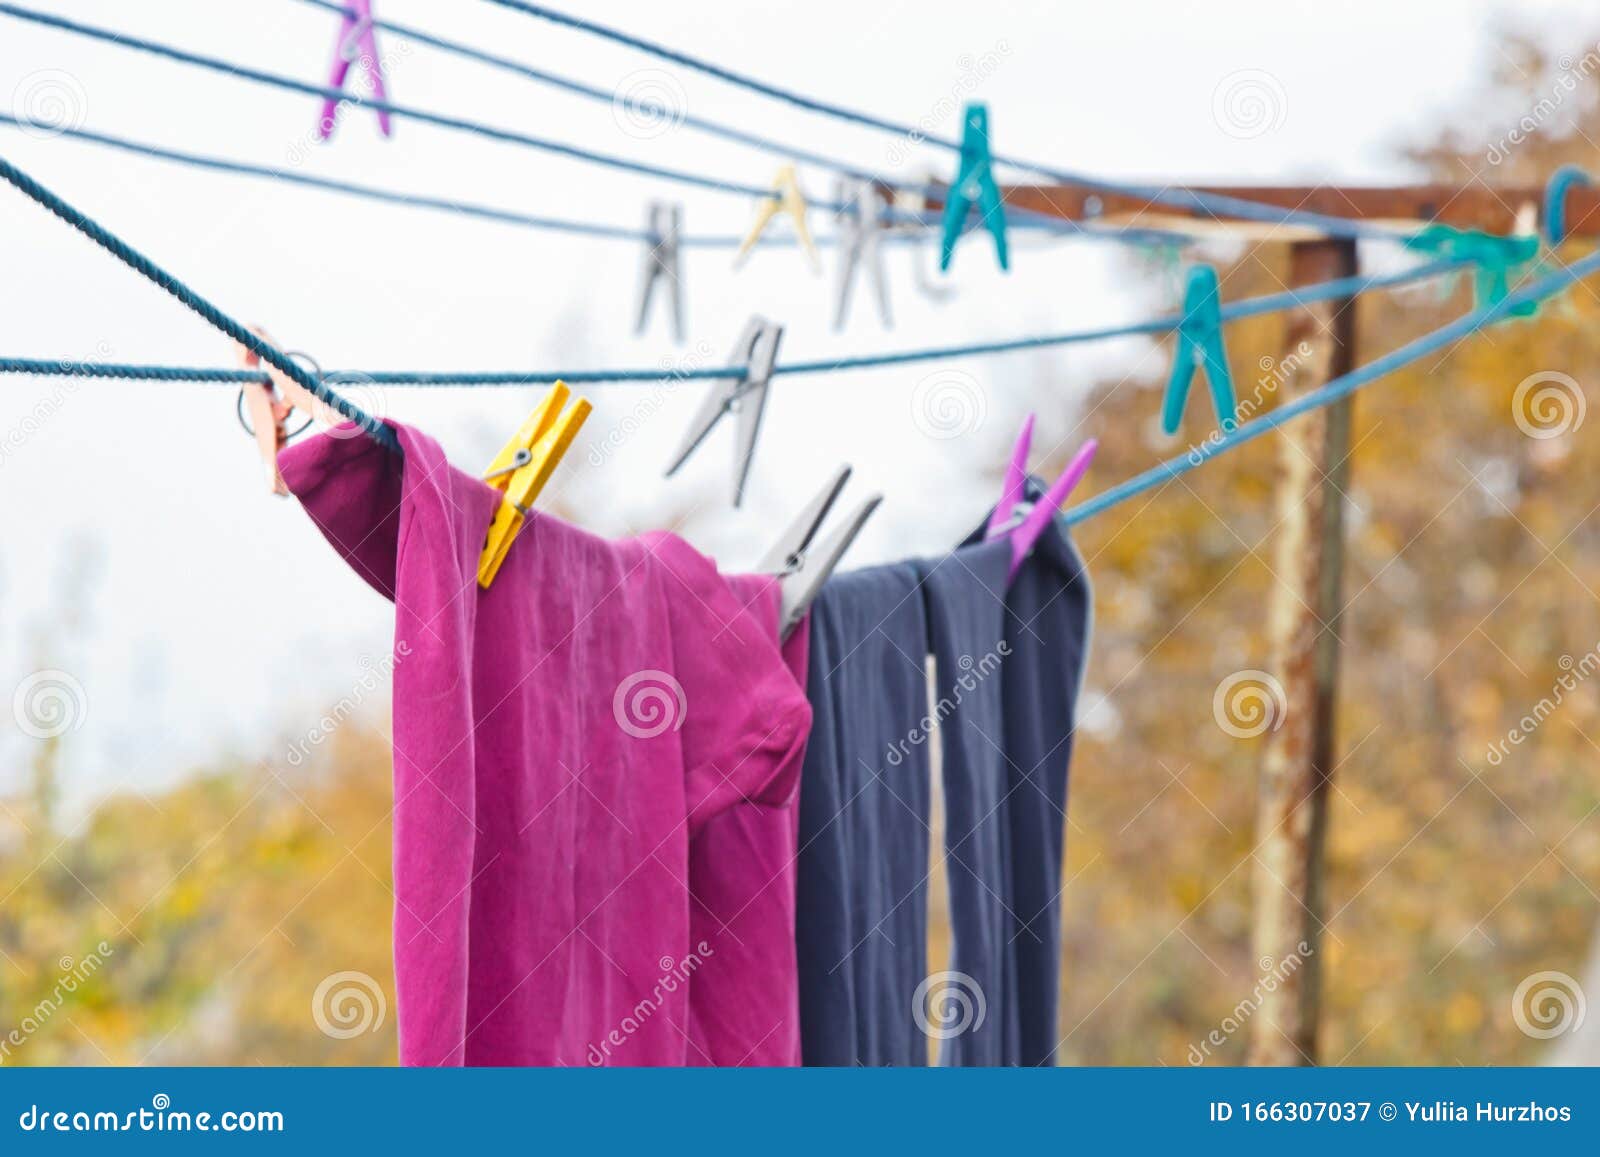 A Clothespin Hangs on the Washing Line. a Rope with Clean Linen